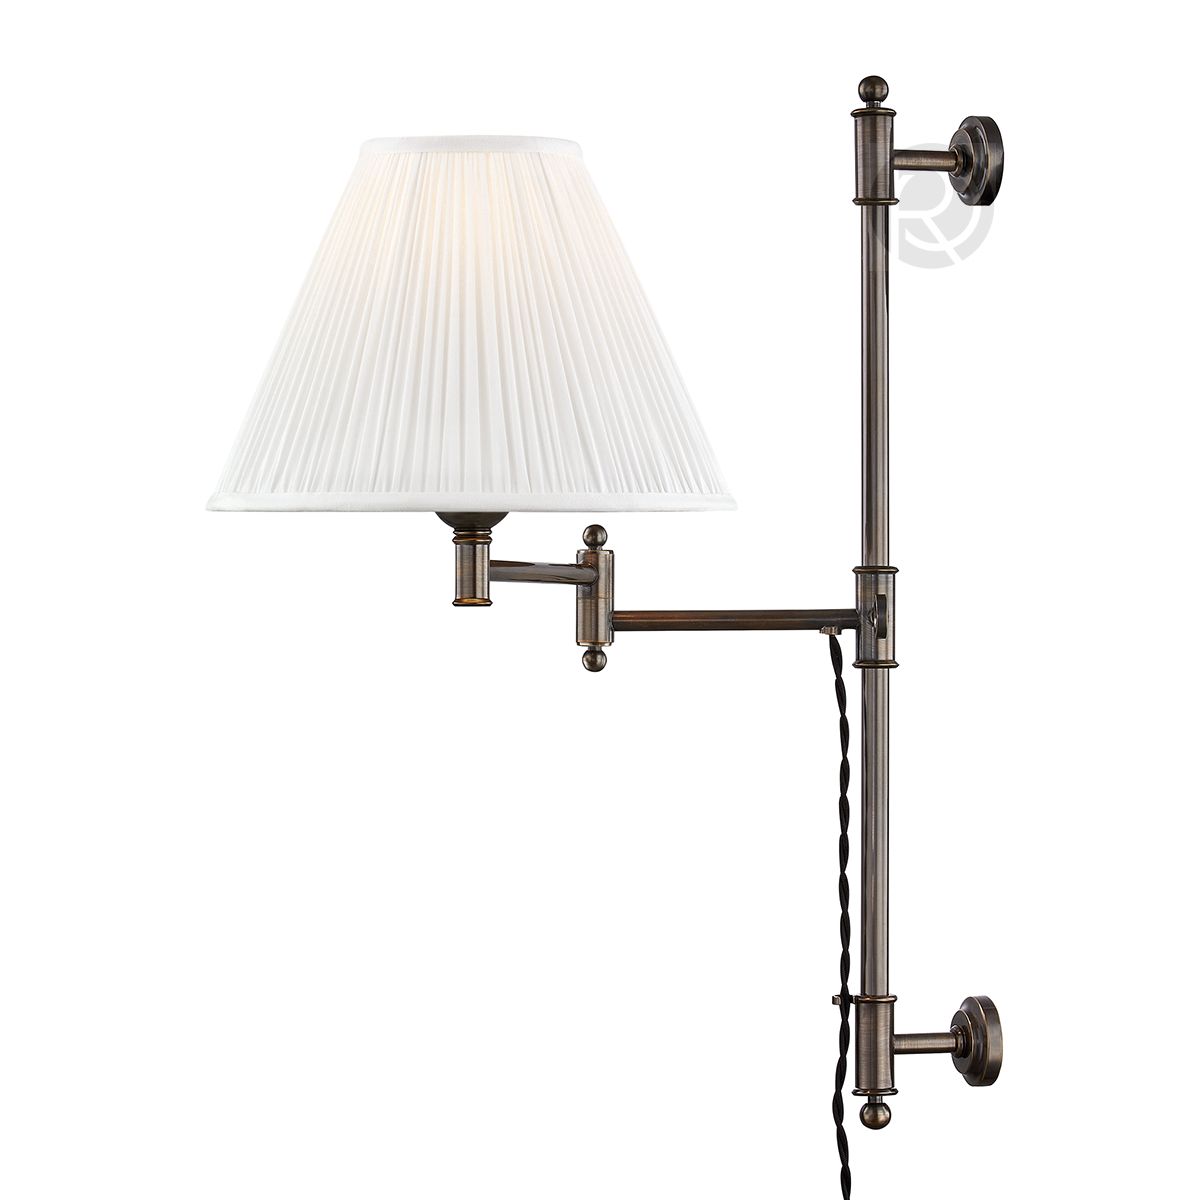 Wall lamp SIKES CLASSIC by Hudson Valley